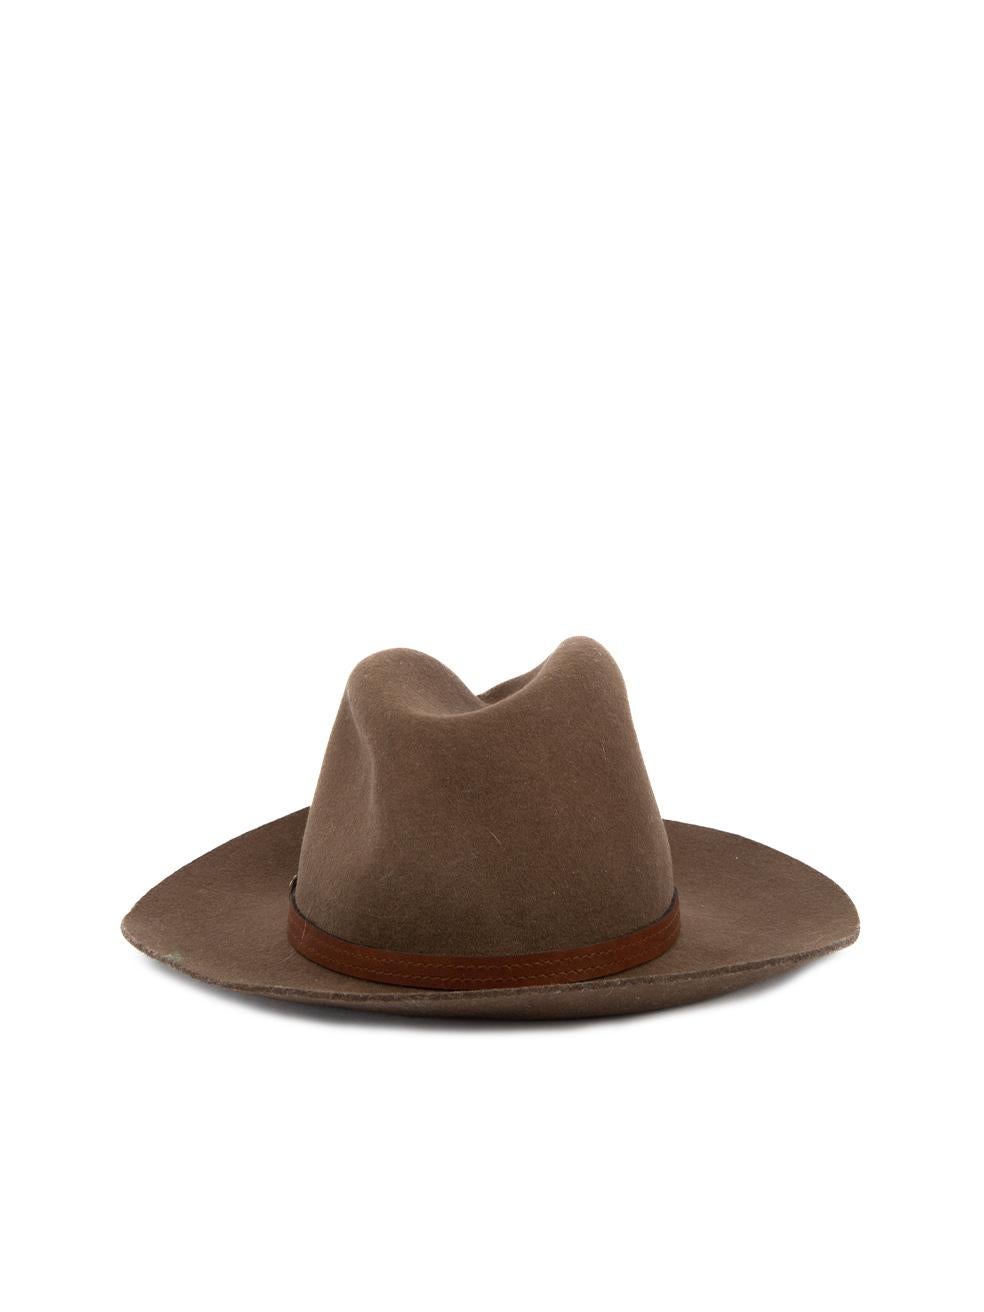 CONDITION is Very Good. Hardly any visible wear to hat is evident on this used Rag & Bone designer resale item. Details Brown Wool Fedora hat Wide brim Leather trimming Made in USA Composition 100% Wool Size & Fit Circumference: 57cm/22. 5in Height: